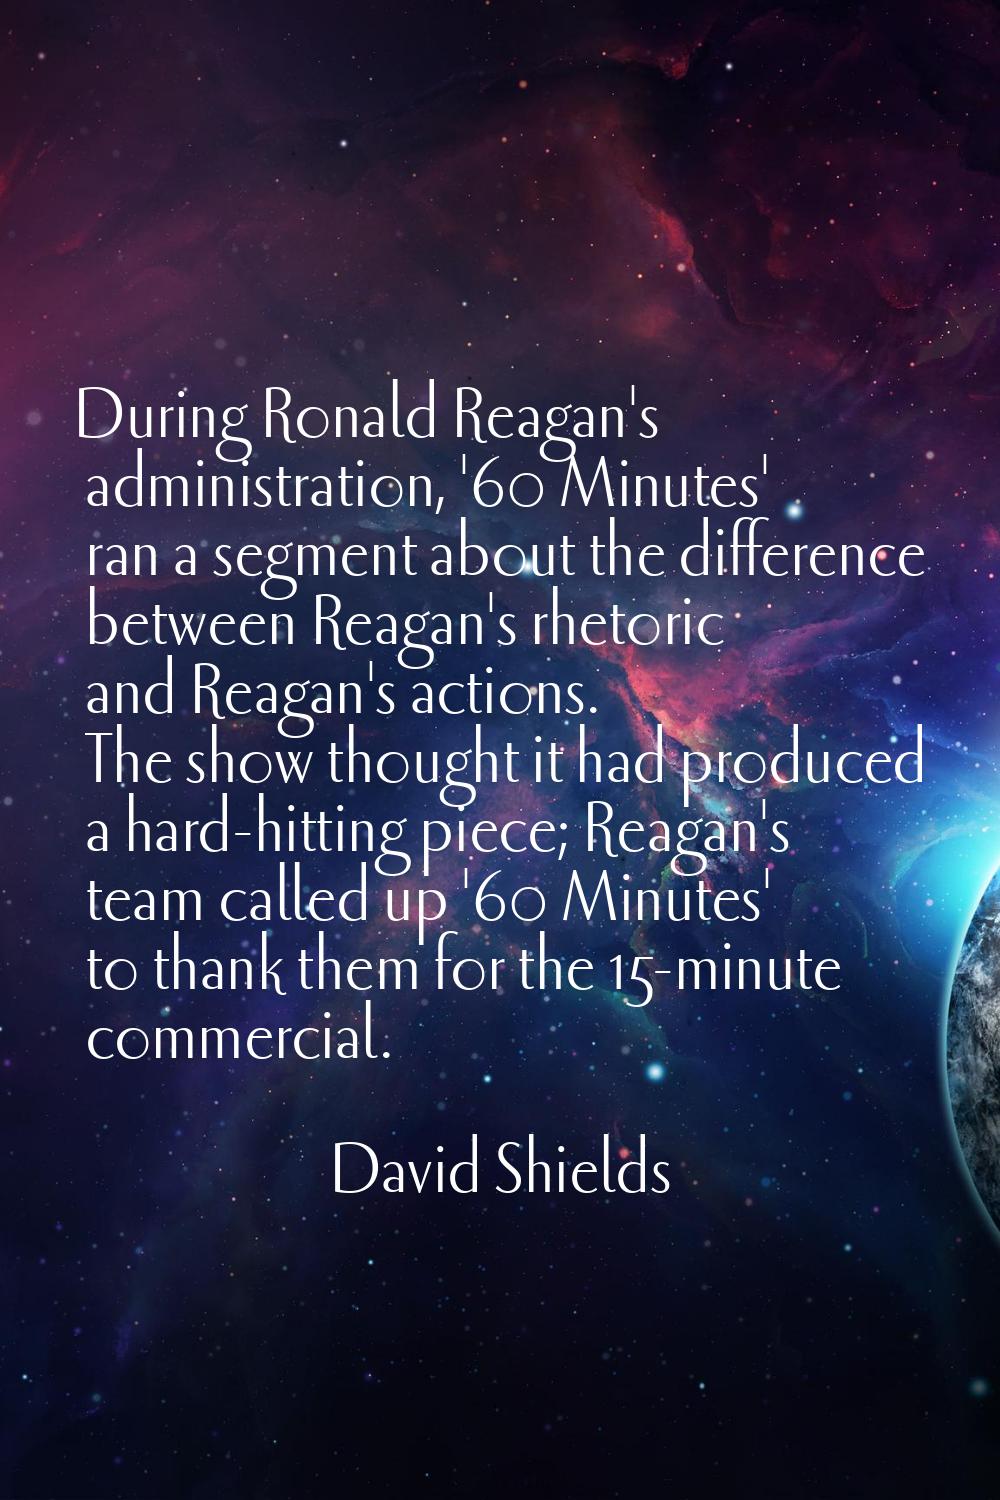 During Ronald Reagan's administration, '60 Minutes' ran a segment about the difference between Reag